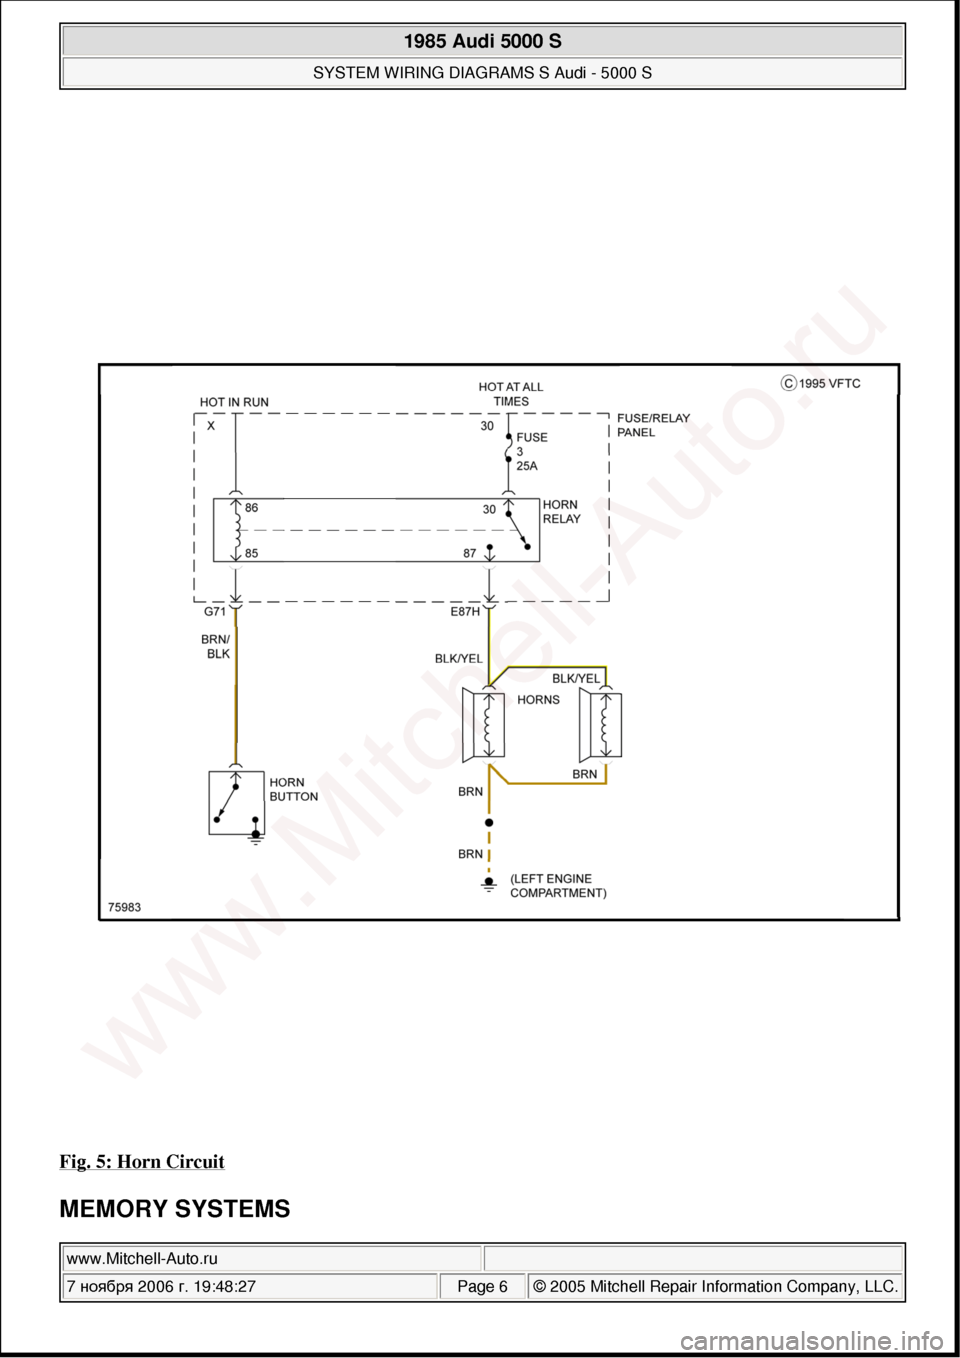 AUDI 5000S 1985 C2 System Wiring Diagram 
Fig. 5: Horn Circuit 
MEMORY SYSTEMS
 
1985 Audi 5000 S 
SYSTEM WIRING DIAGRAMS S Audi - 5000 S  
www.Mitchell-Auto.ru  
7 ноября  2006 г. 19:48:27Page 6 © 2005 Mitchell Repair Information Co